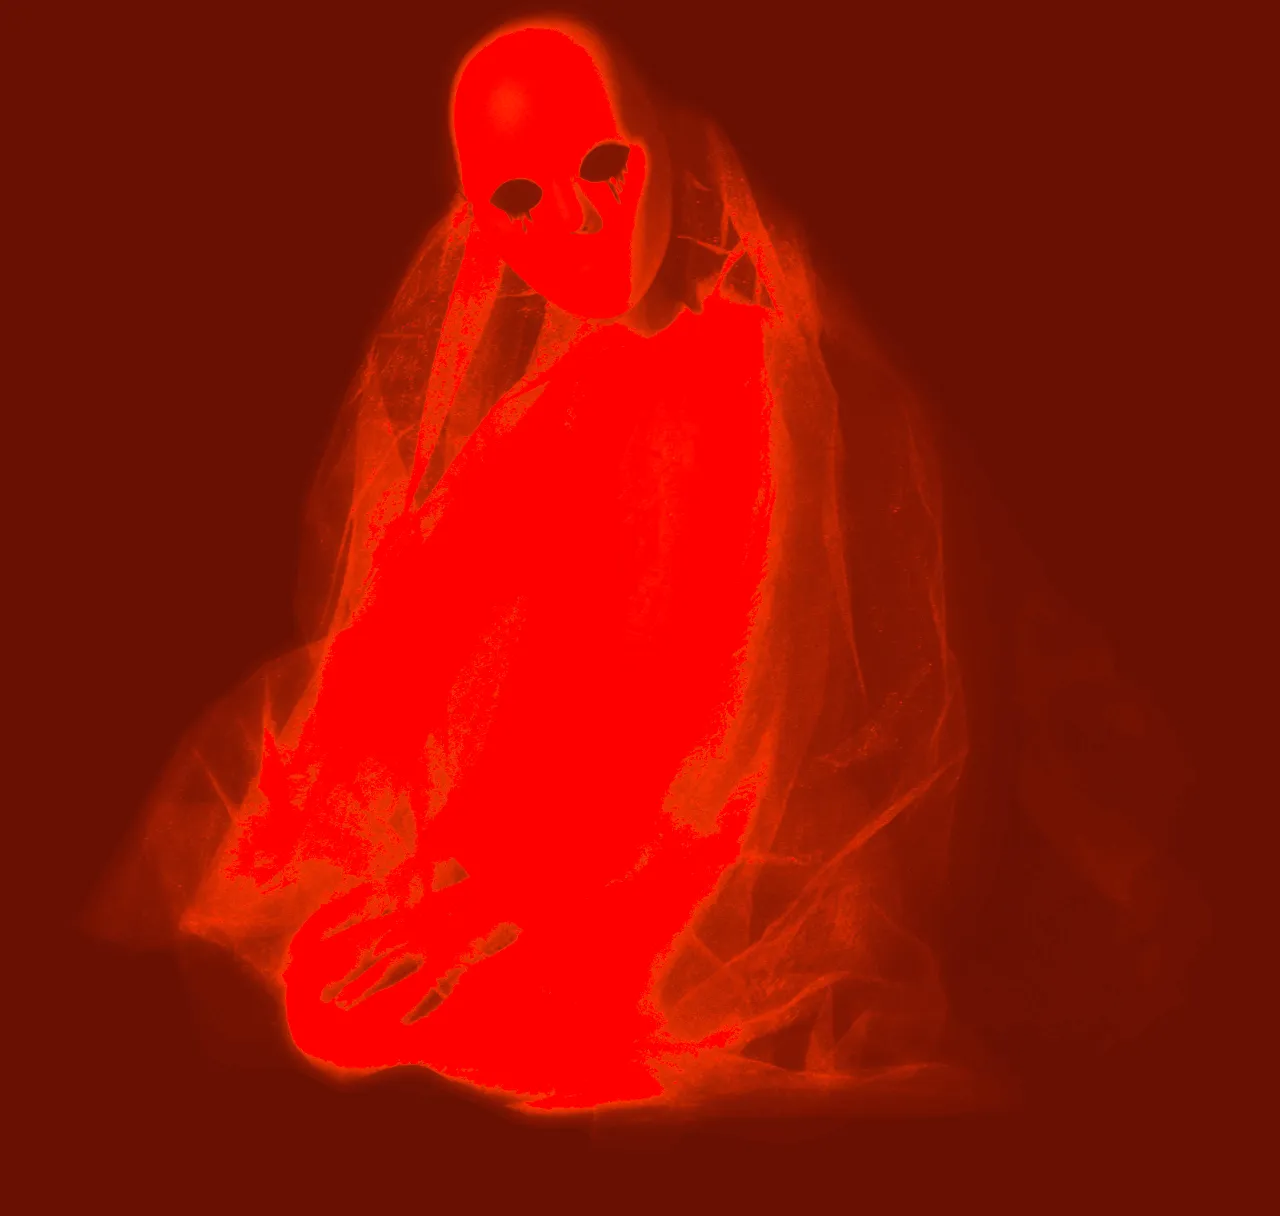 Red ghost sitting quietly among billowing steam from cups of tea, coffee, and hot chocolate on an antique table